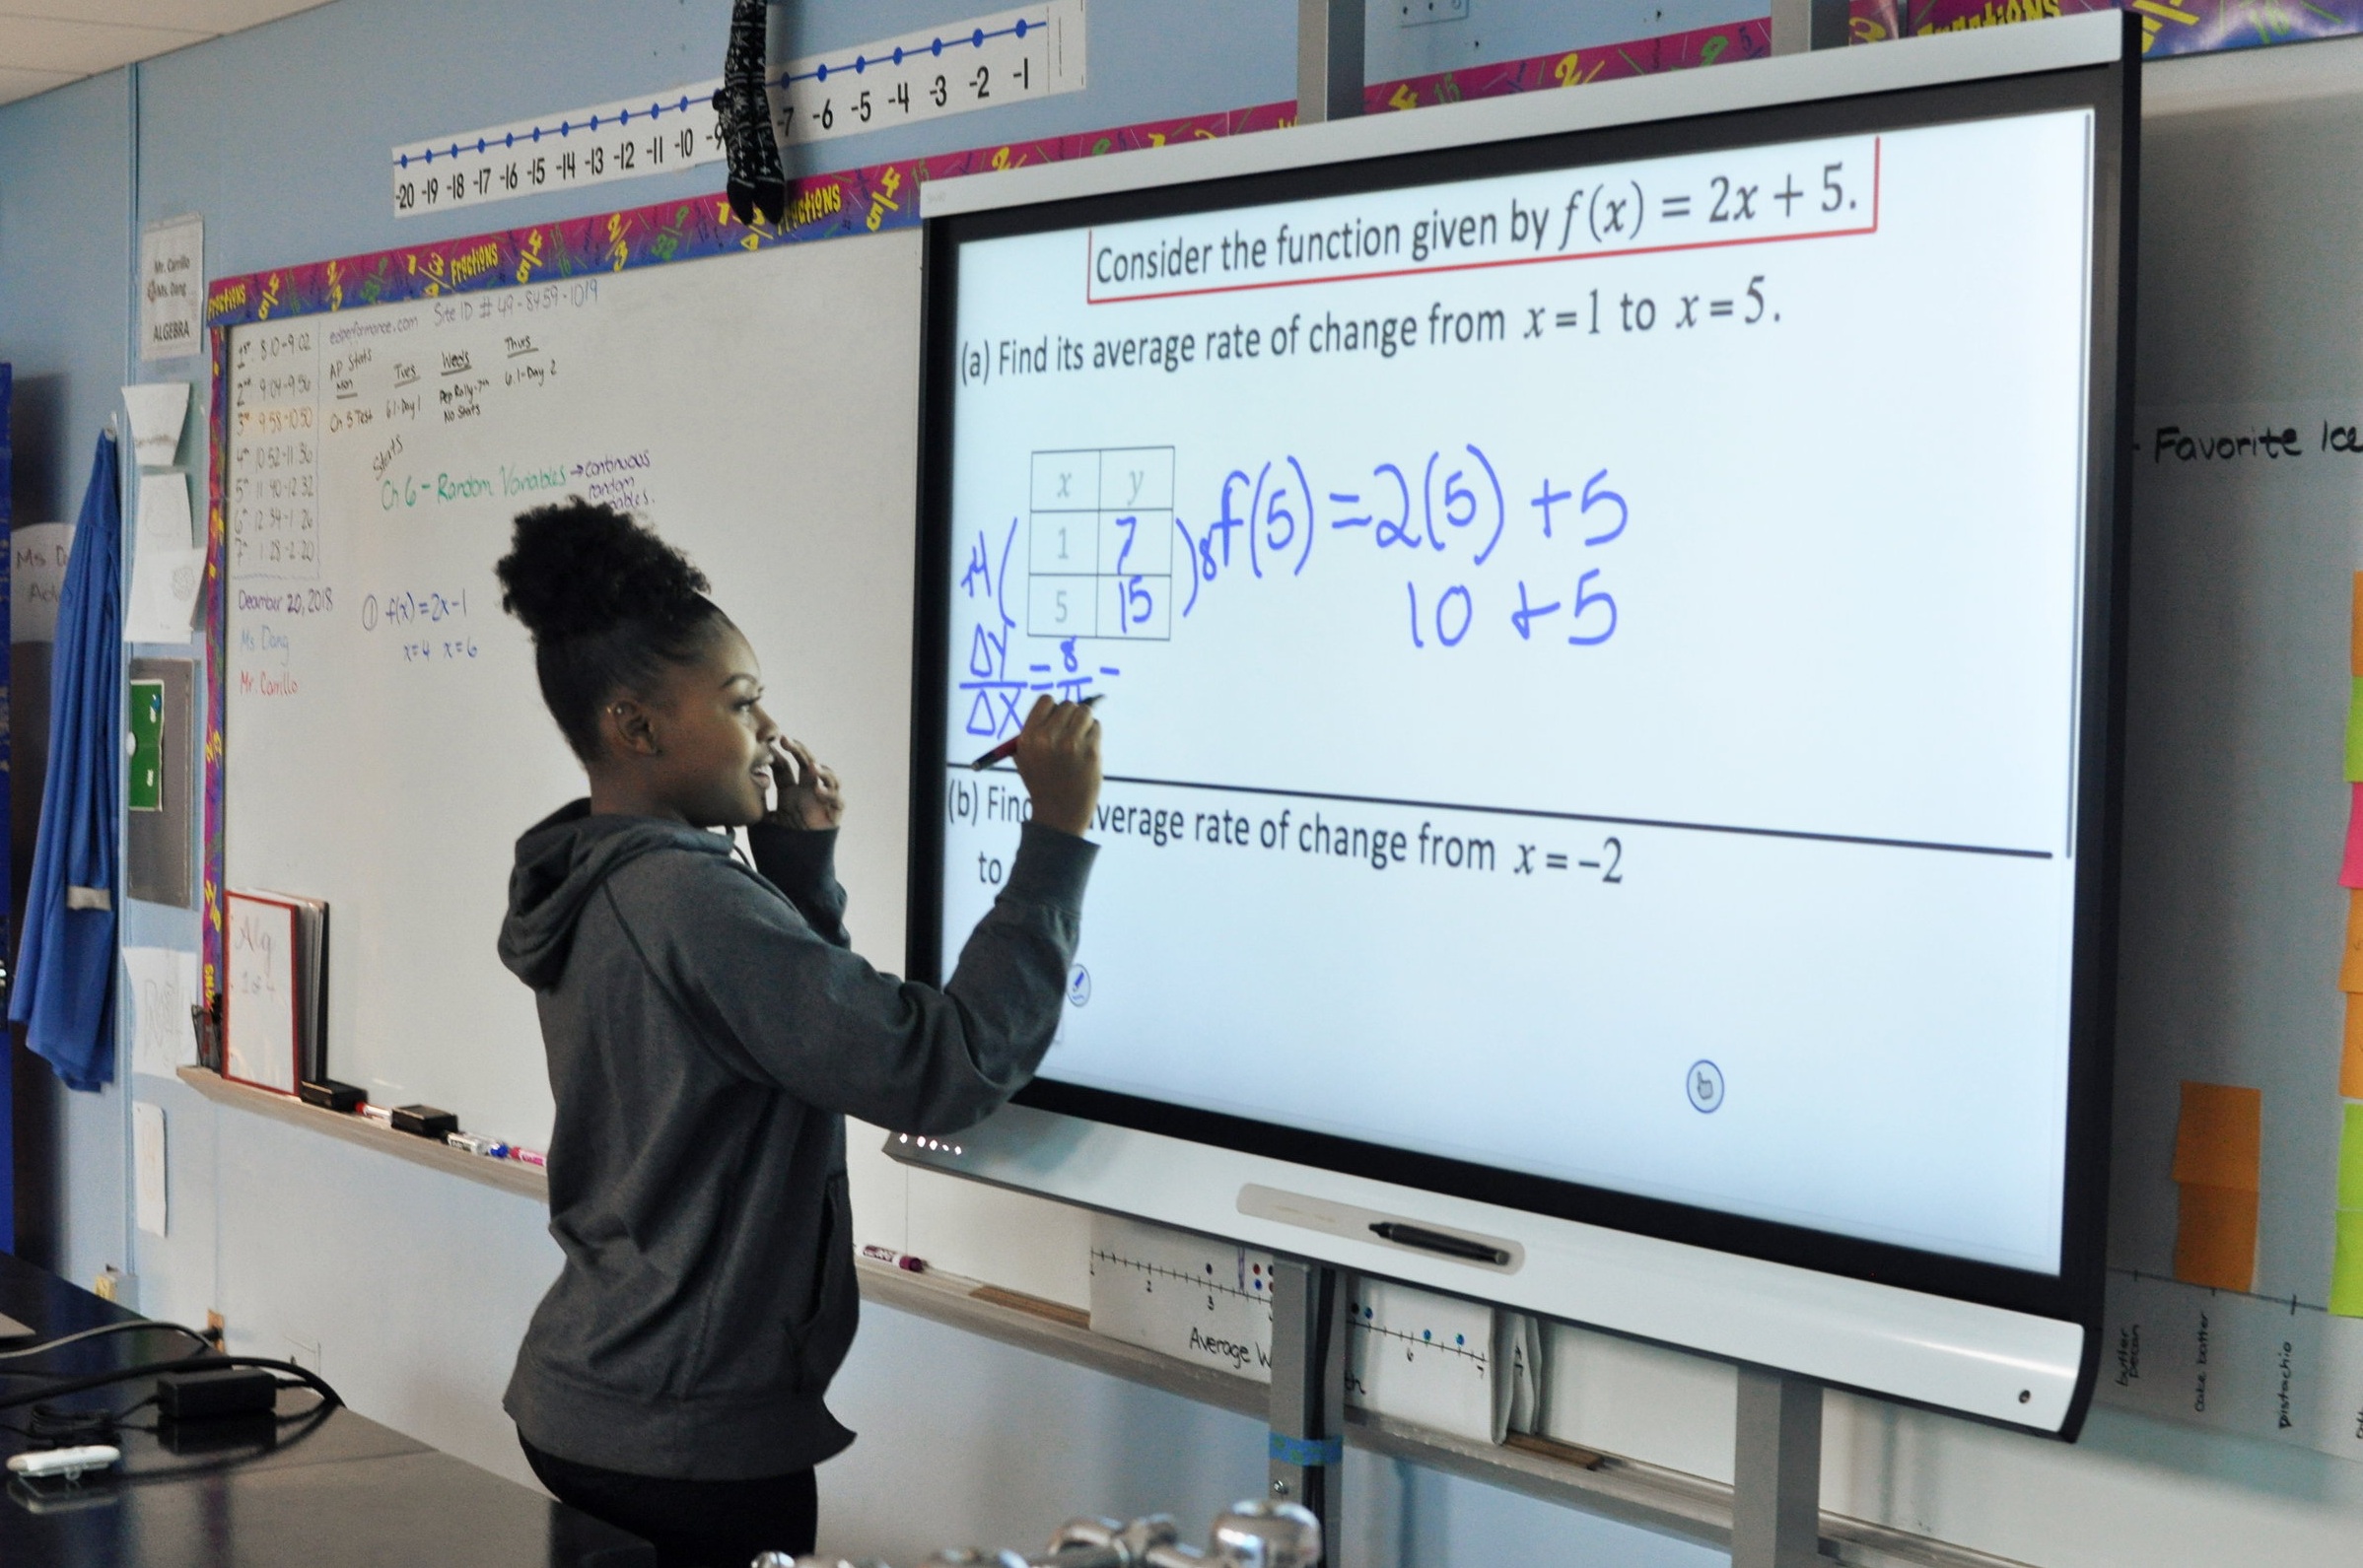 student uses smart board to work on math problem